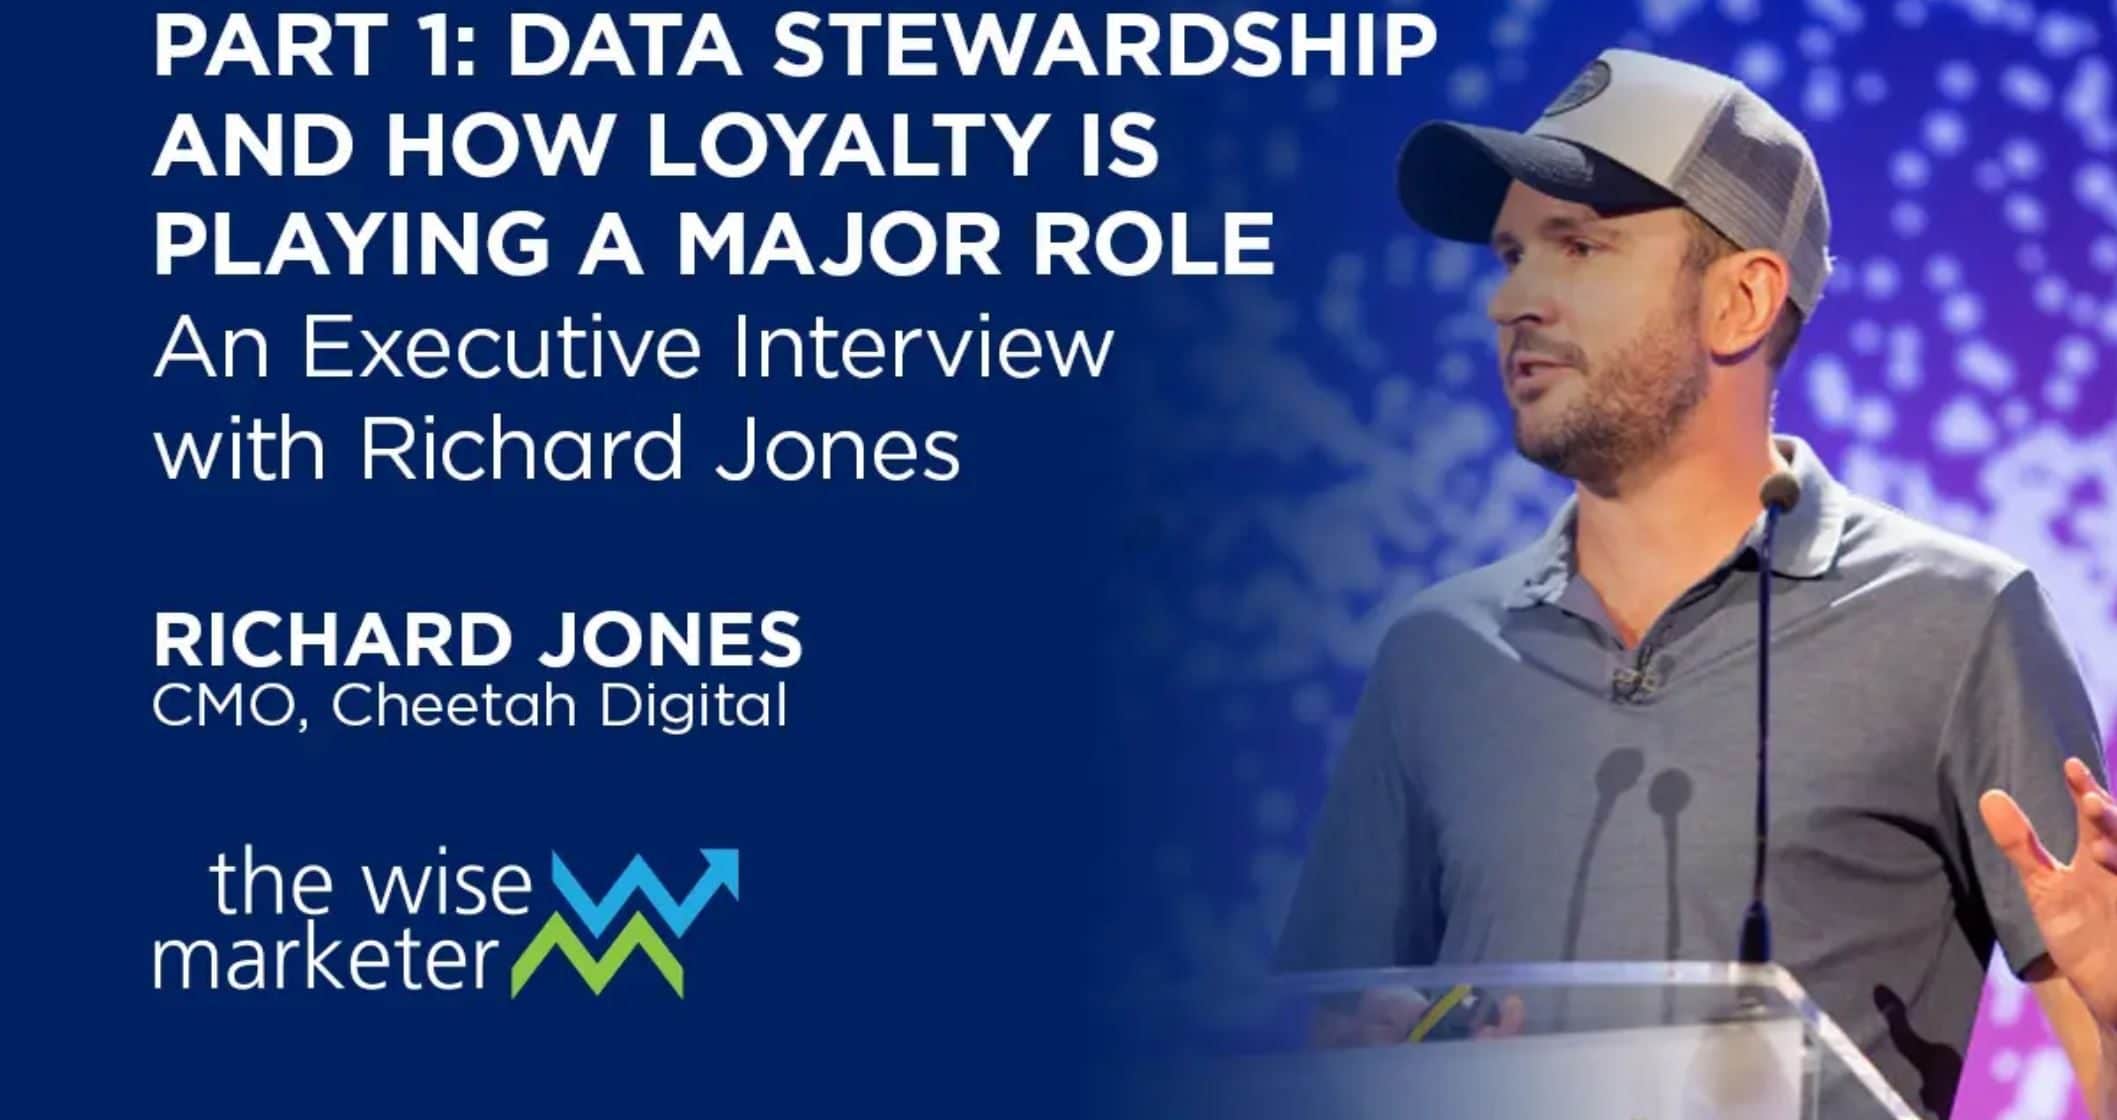 Richard Jones discusses data stewardship and loyalty's major role.